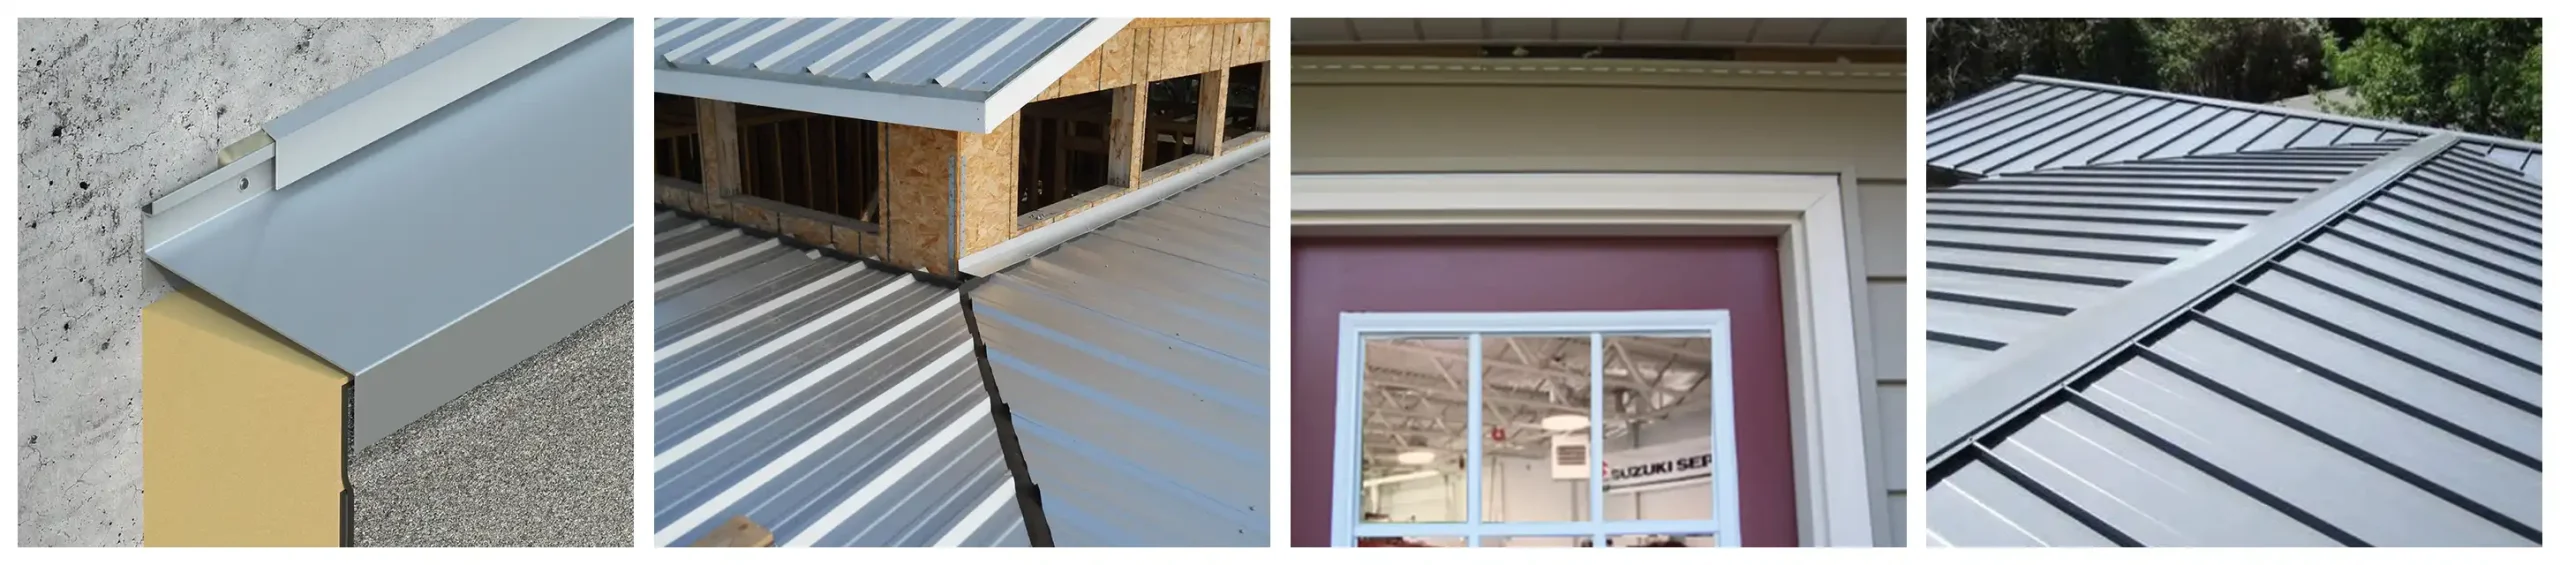 aluminum flashing coil for Roof, Window and Door Flashing, Siding and Trim, Gutters and Downspouts, Foundation Flashing